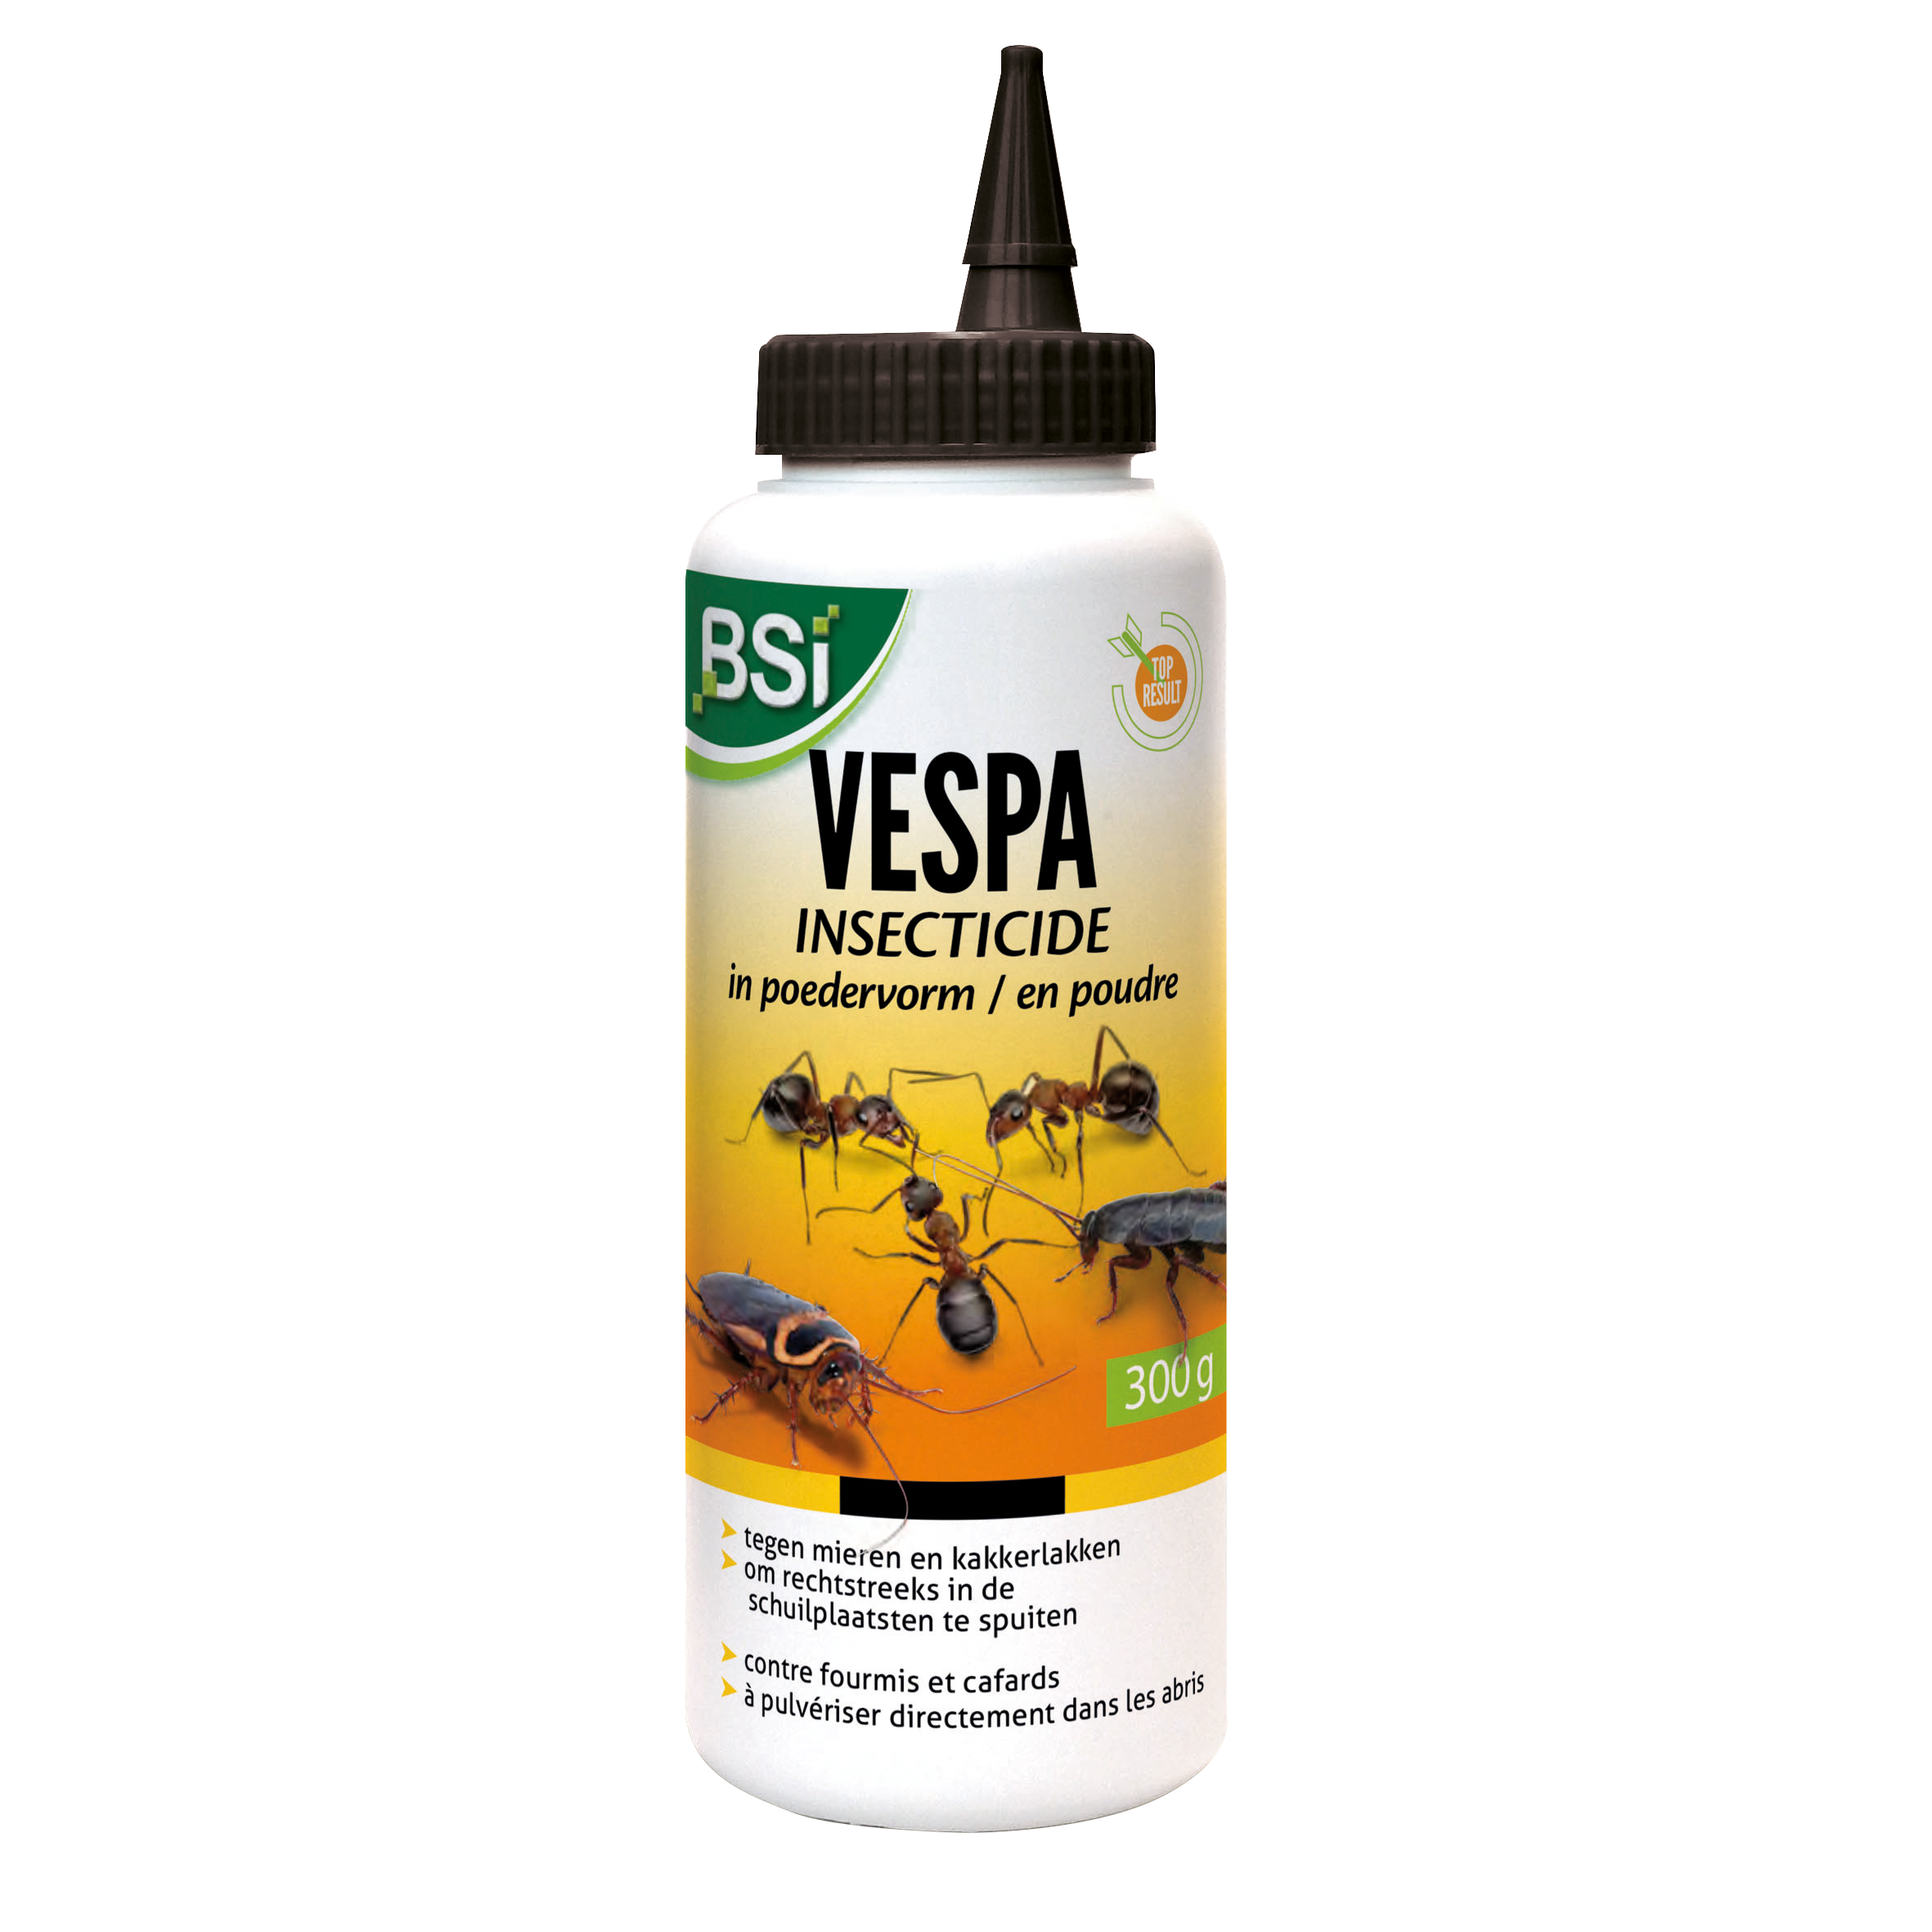 Vespa (402B) Insecticide - BSI 300g BE/LU image